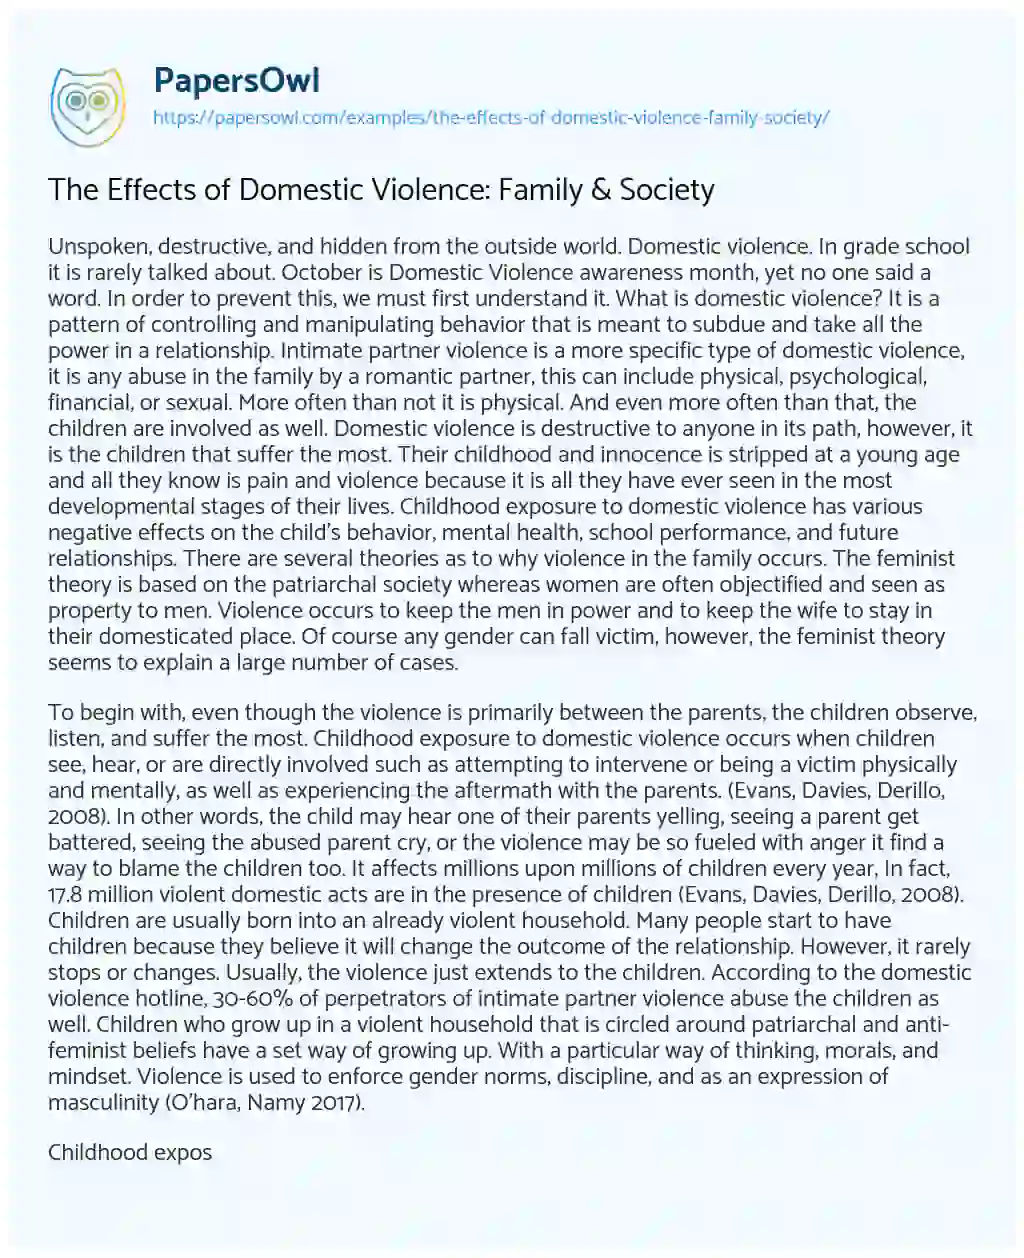 Essay on The Effects of Domestic Violence: Family & Society